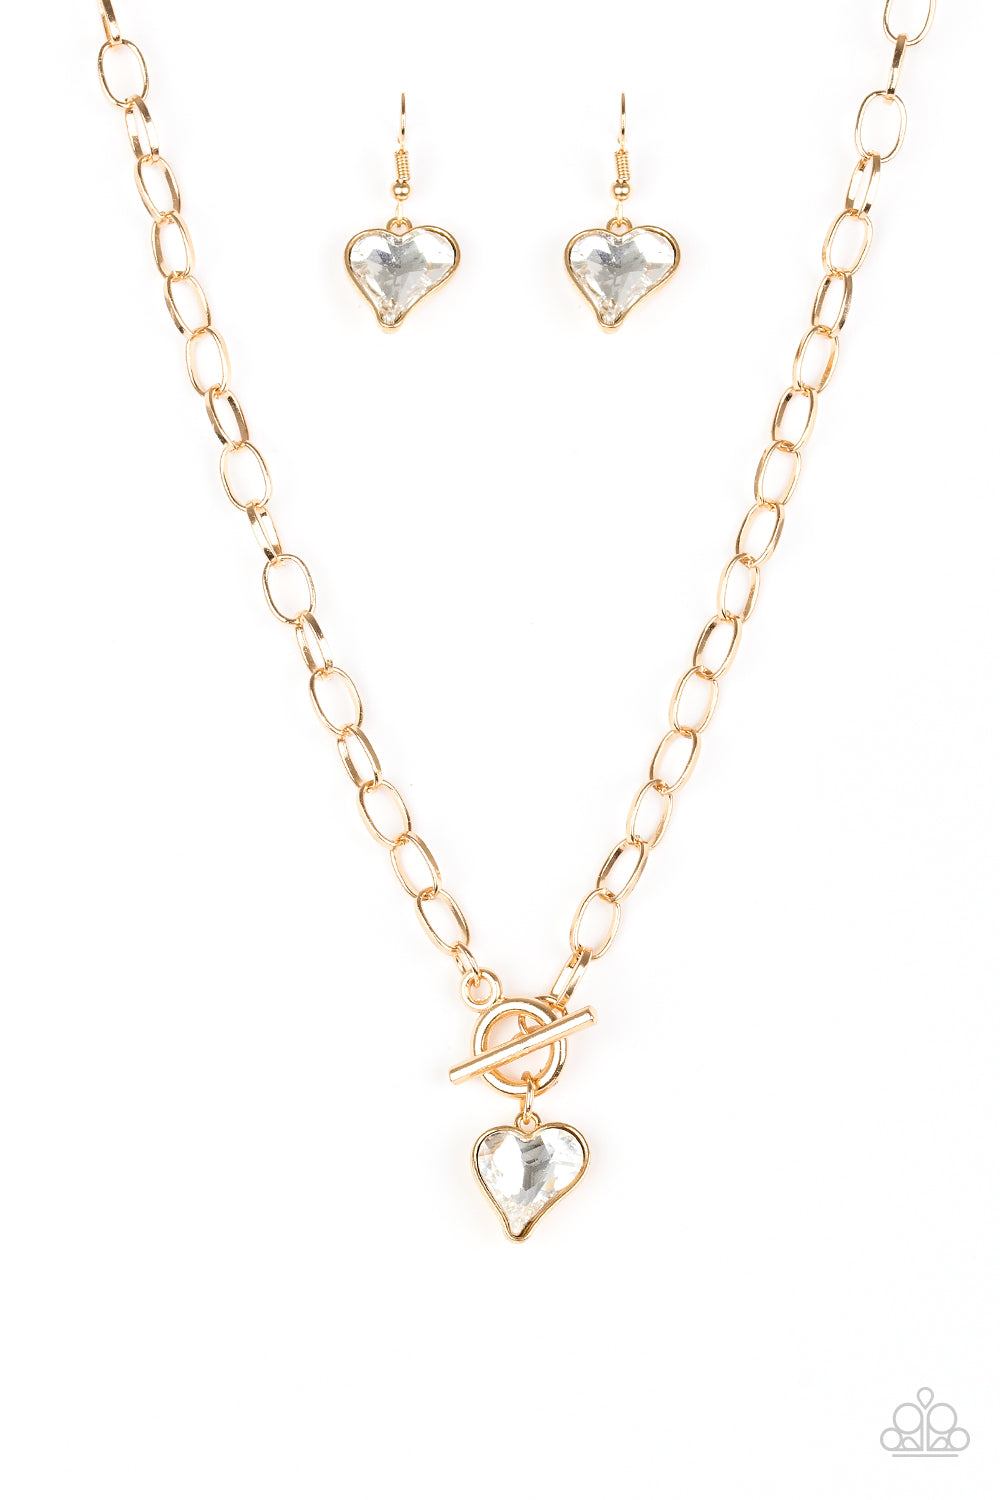 Paparazzi Accessories necklace, new gold, cut into a whimsical heart shape, a glittery white gem swings from the bottom of a glistening gold chain below the collar for a charming look. Features a toggle closure.